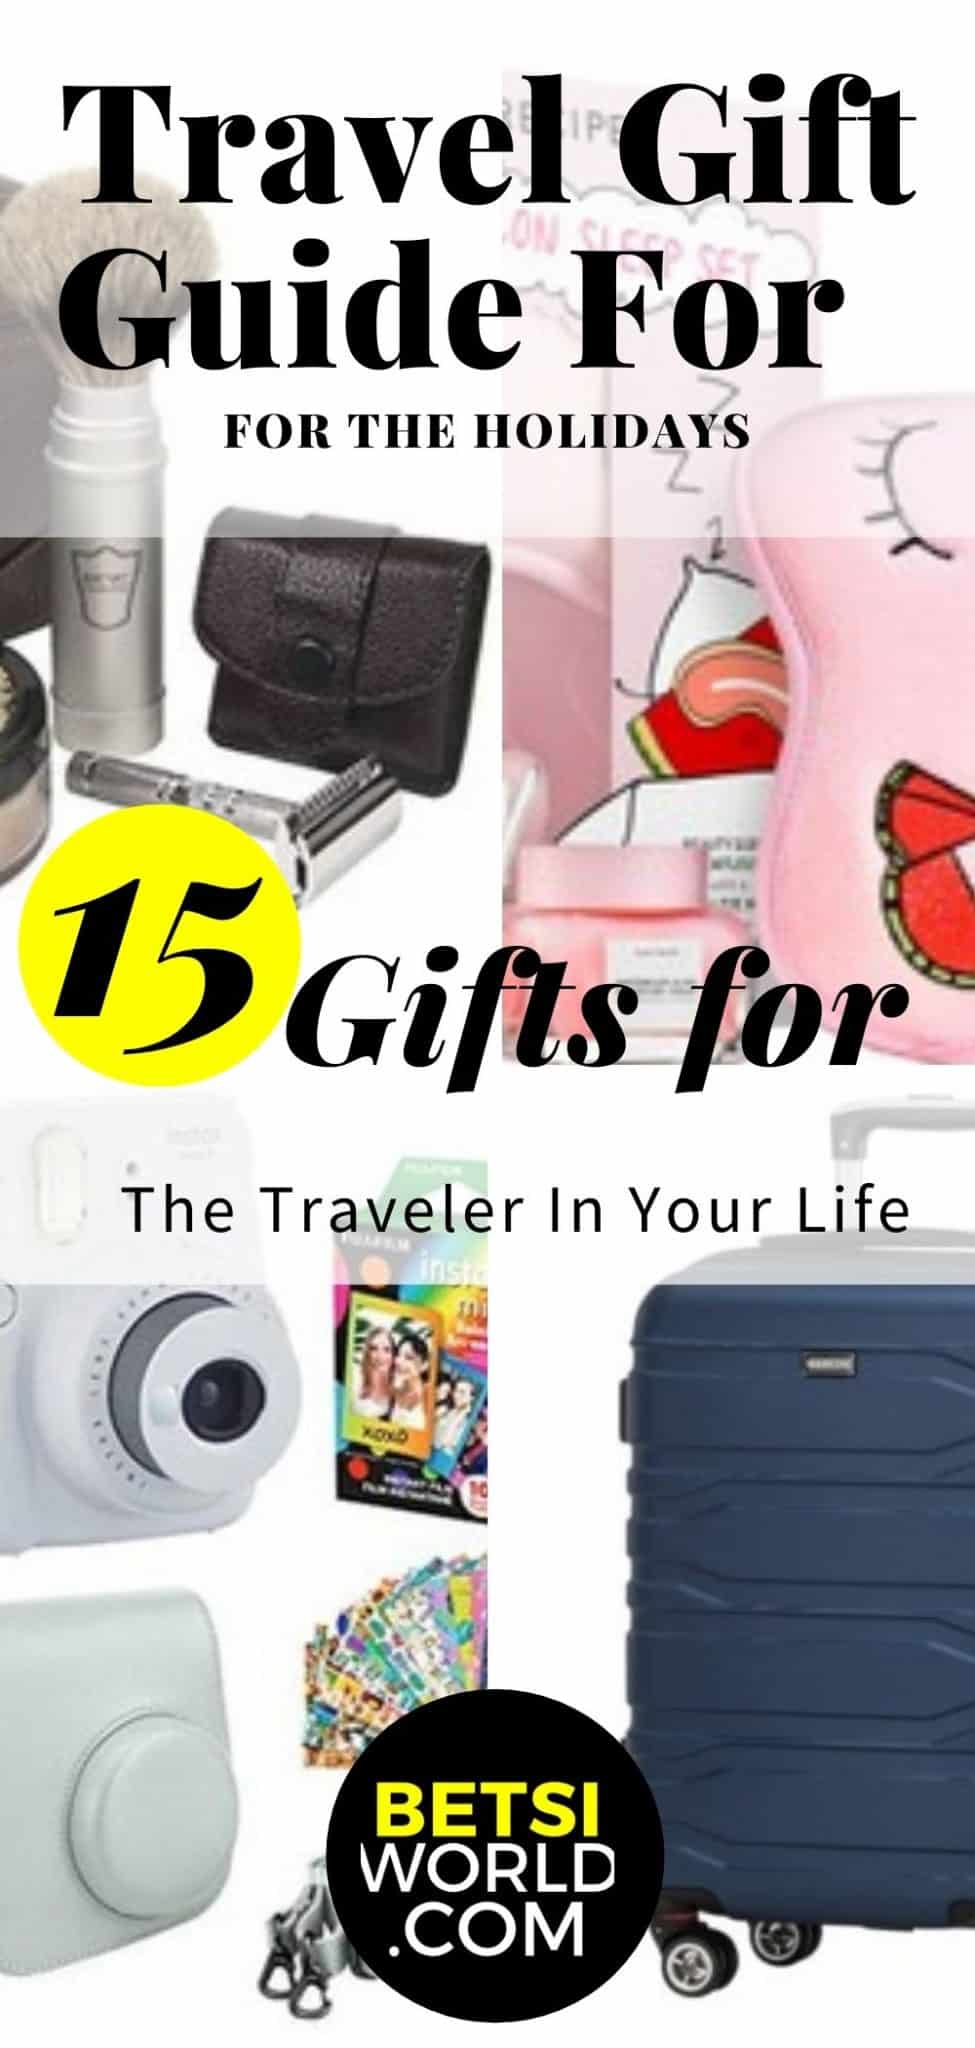 Travel Gift Guide For The Holidays - Betsi Hill Travel